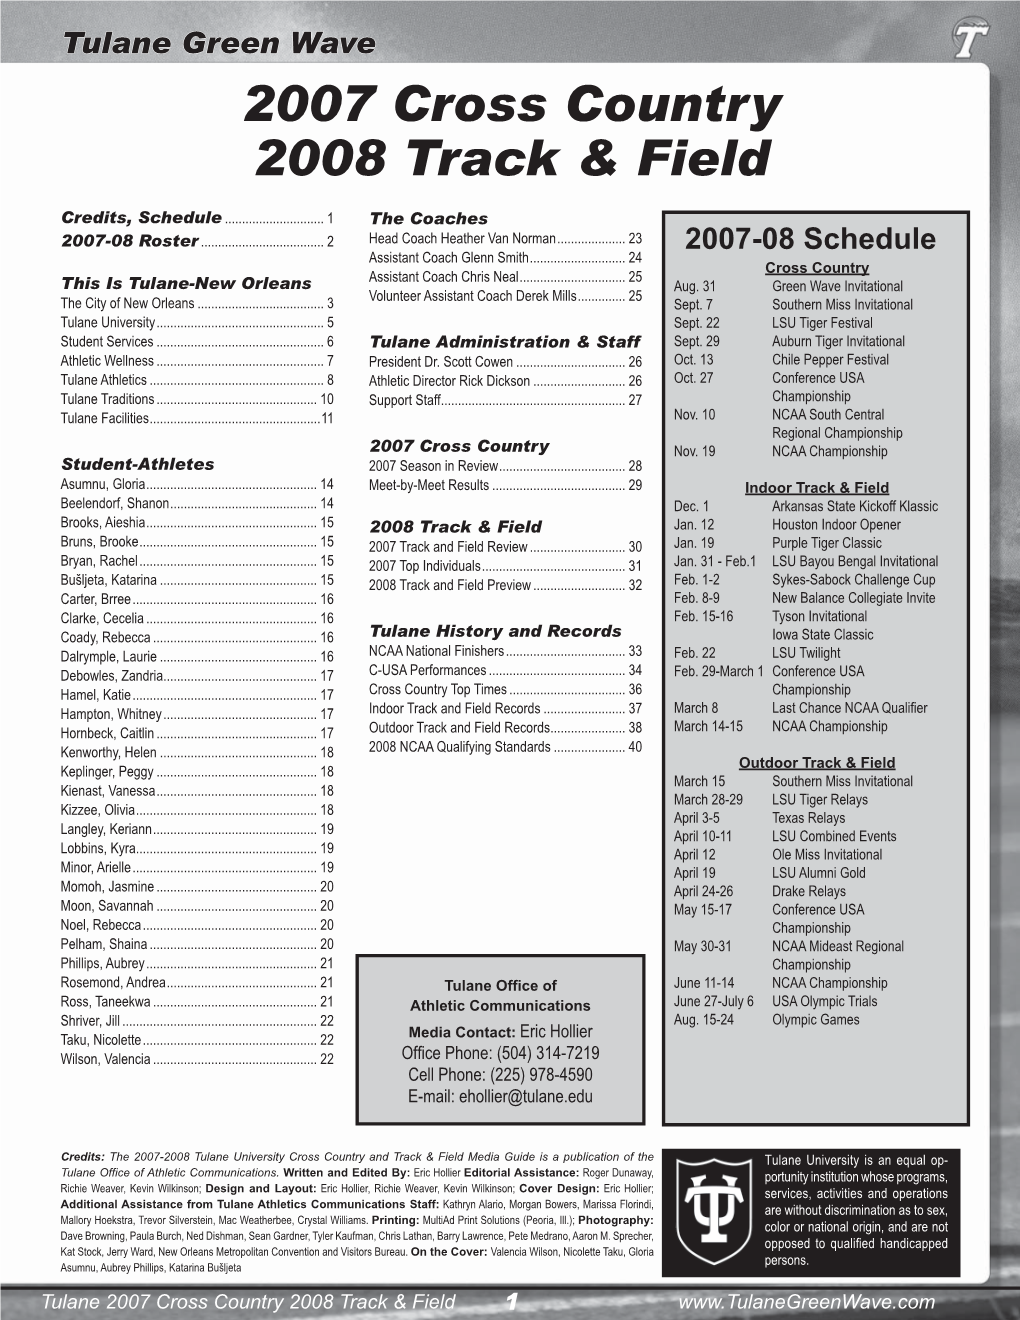 2007 Cross Country 2008 Track & Field